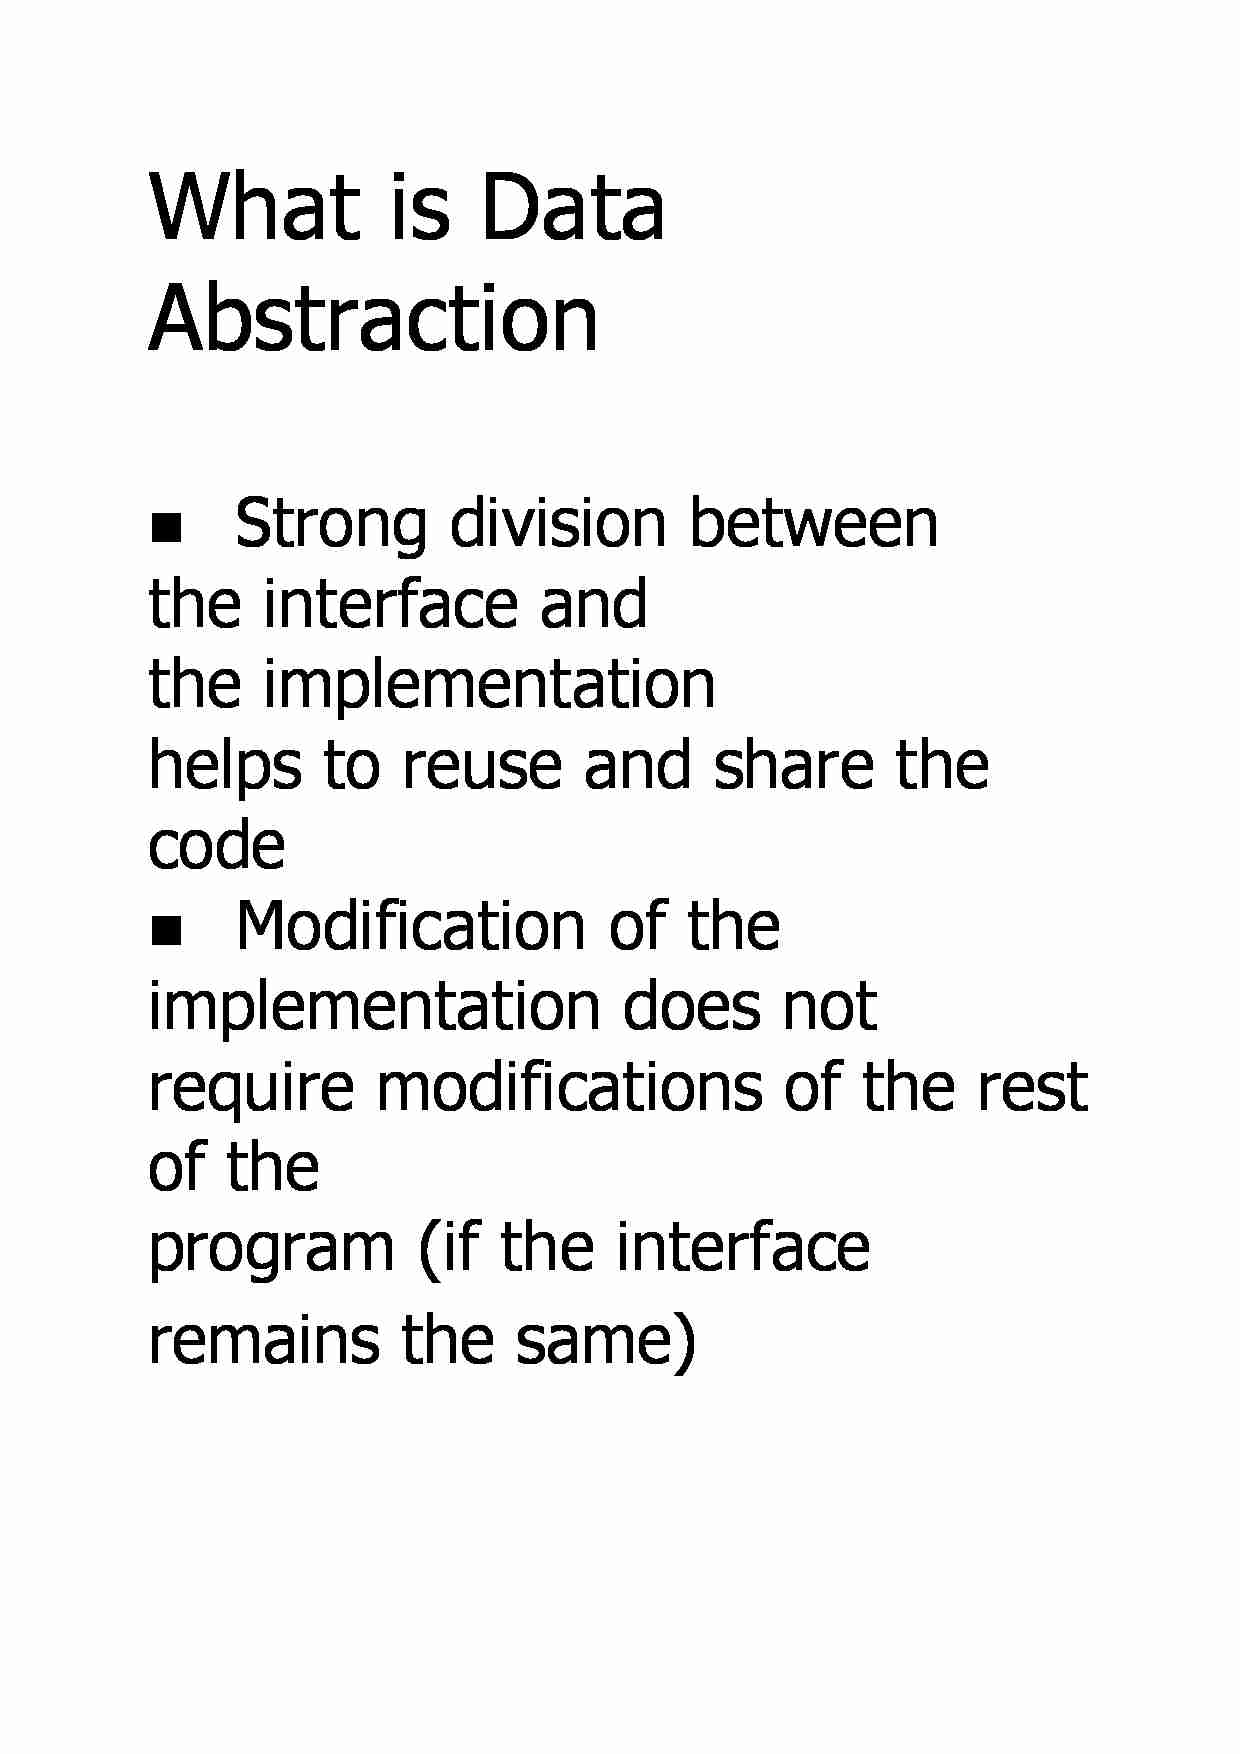 What is Data Abstraction - strona 1